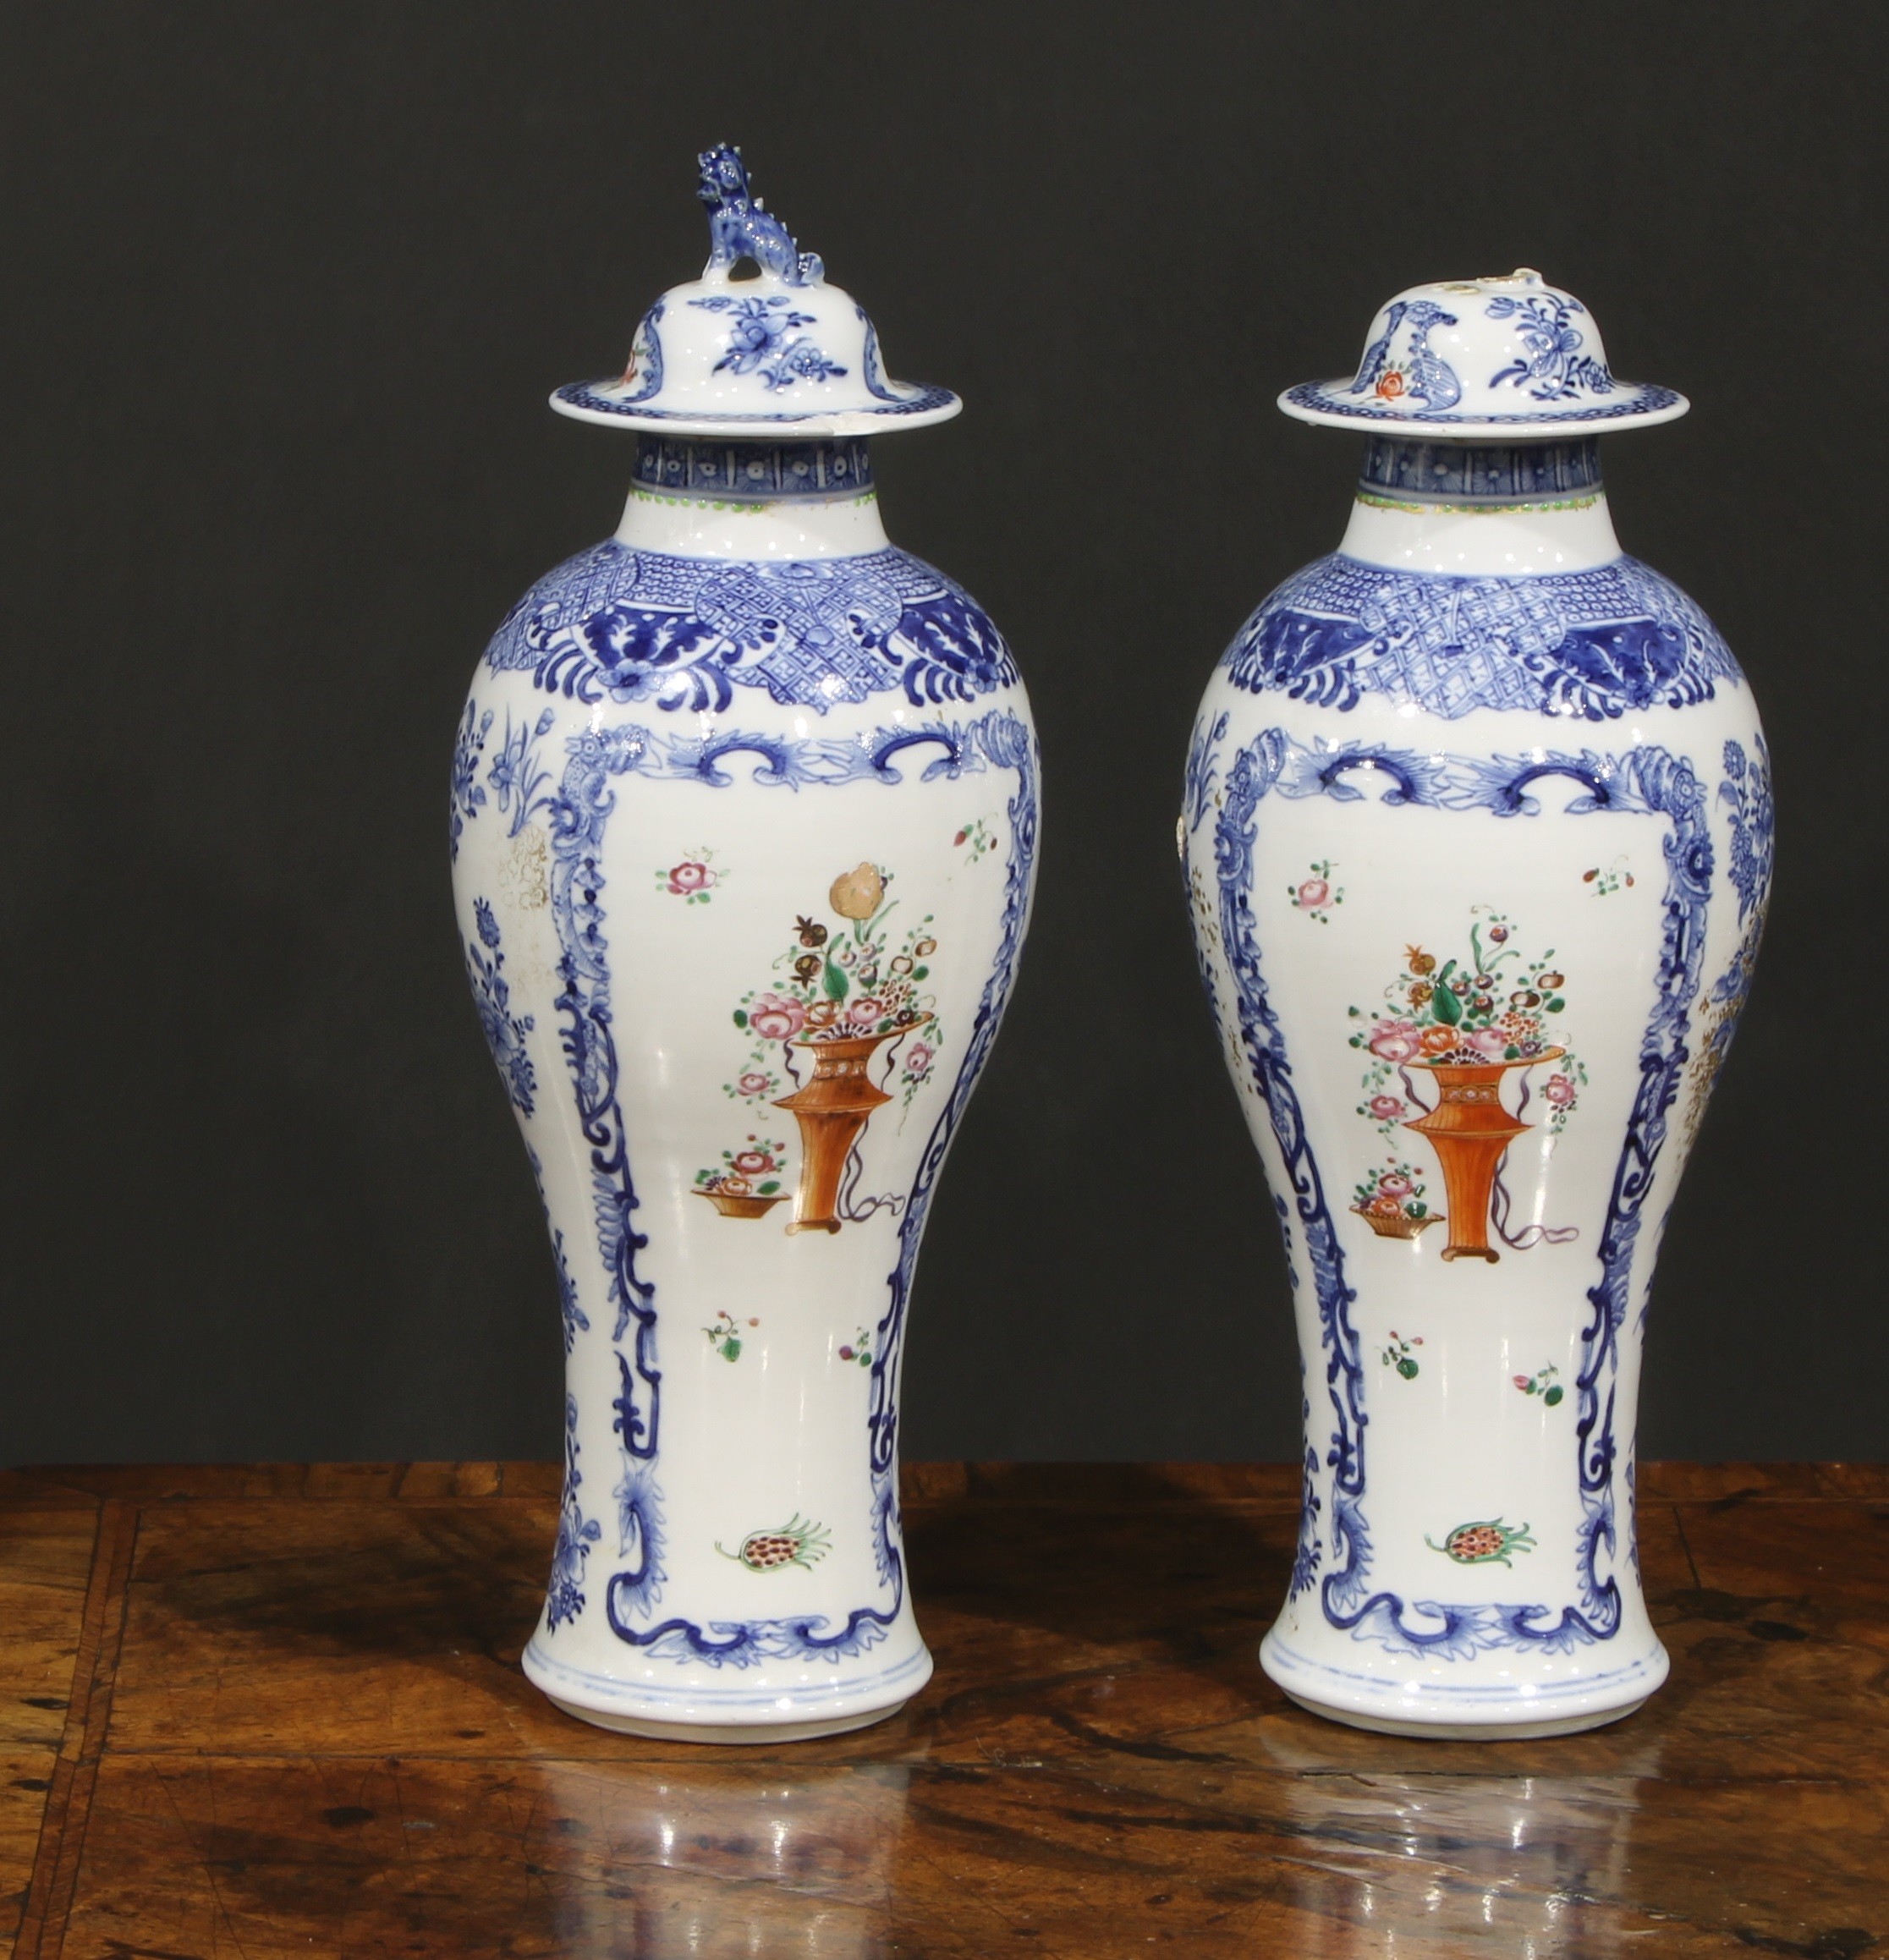 A pair of Chinese baluster vases and covers, painted in the Mandarin palette with vases of flowers